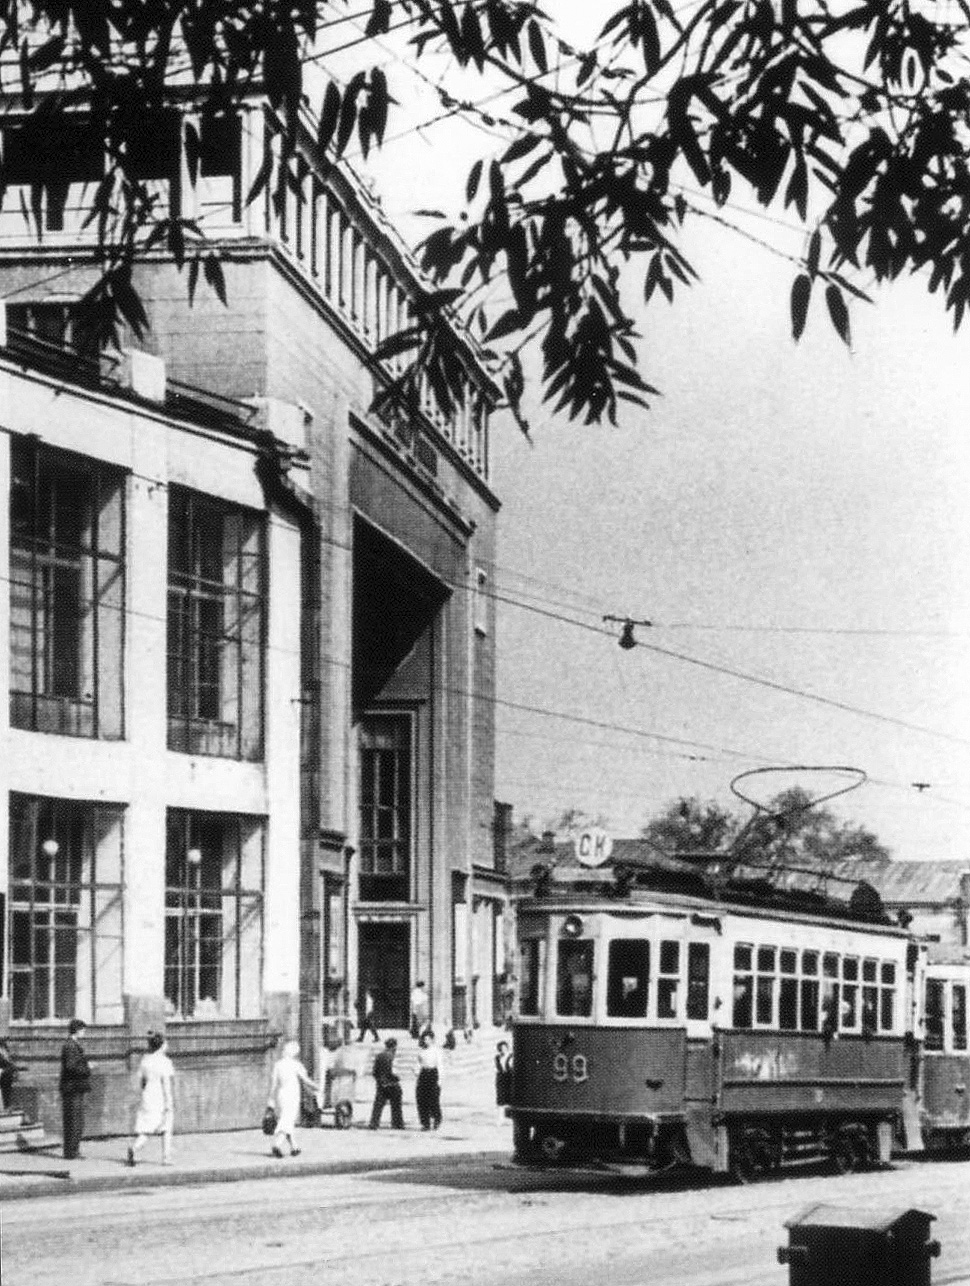 Moscow, BF № 99; Moscow — Historical photos — Tramway and Trolleybus (1946-1991)